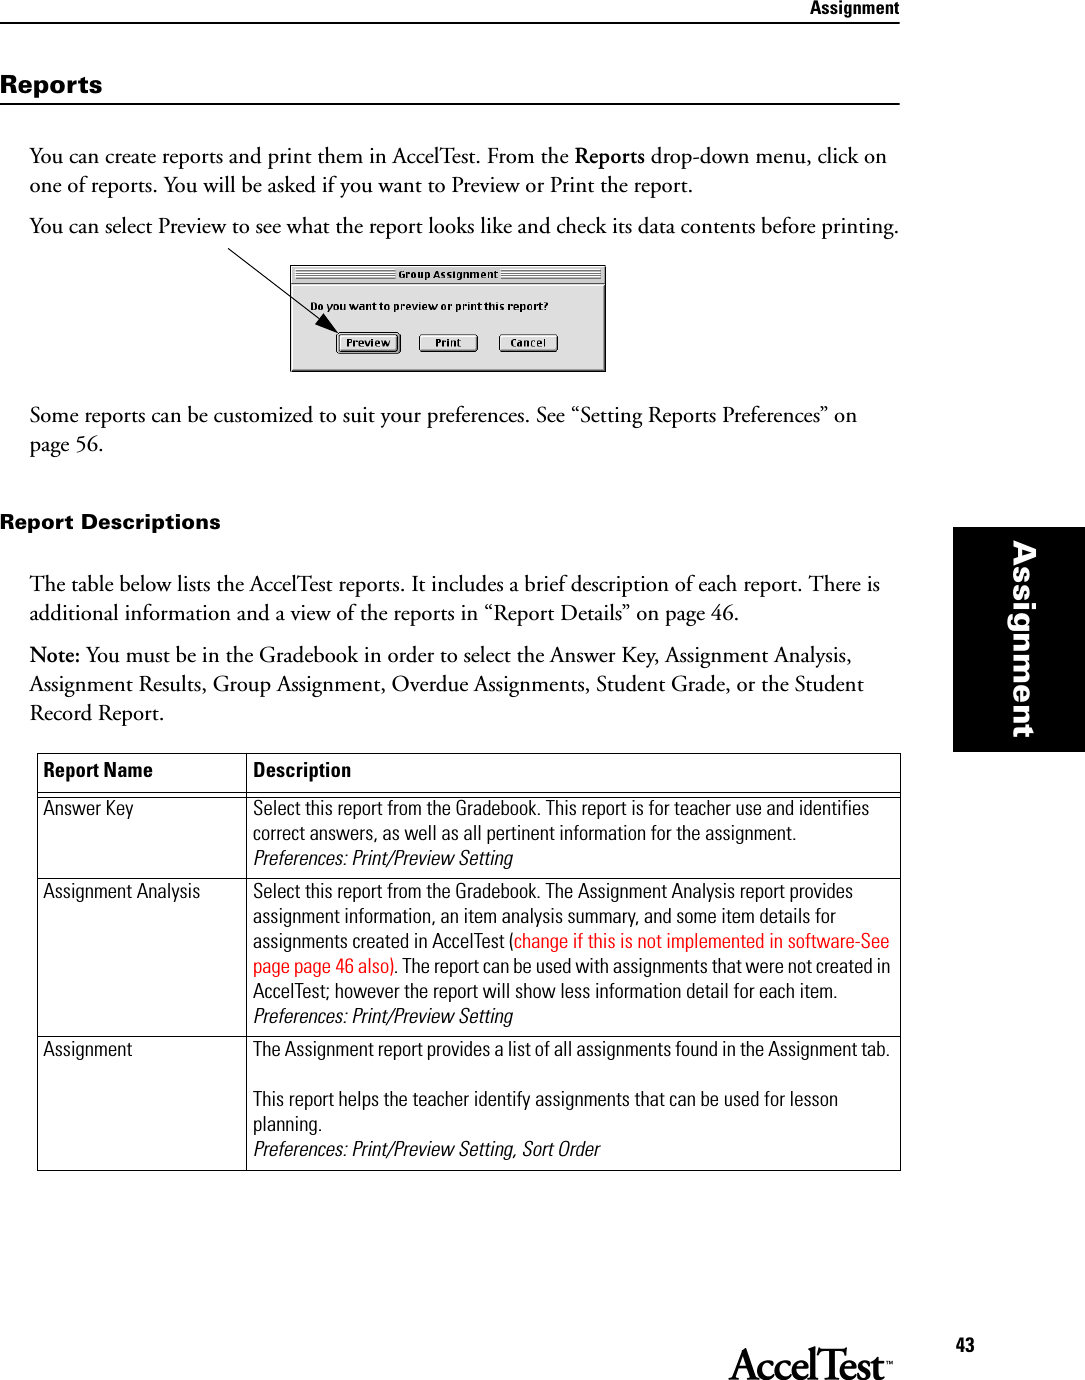 Assignment43AssignmentReportsYou can create reports and print them in AccelTest. From the Reports drop-down menu, click on one of reports. You will be asked if you want to Preview or Print the report. You can select Preview to see what the report looks like and check its data contents before printing.Some reports can be customized to suit your preferences. See “Setting Reports Preferences” on page 56. Report DescriptionsThe table below lists the AccelTest reports. It includes a brief description of each report. There is additional information and a view of the reports in “Report Details” on page 46. Note: You must be in the Gradebook in order to select the Answer Key, Assignment Analysis, Assignment Results, Group Assignment, Overdue Assignments, Student Grade, or the Student Record Report.Report Name DescriptionAnswer Key Select this report from the Gradebook. This report is for teacher use and identifies correct answers, as well as all pertinent information for the assignment.Preferences: Print/Preview SettingAssignment Analysis  Select this report from the Gradebook. The Assignment Analysis report provides assignment information, an item analysis summary, and some item details for assignments created in AccelTest (change if this is not implemented in software-See page page 46 also). The report can be used with assignments that were not created in AccelTest; however the report will show less information detail for each item.Preferences: Print/Preview SettingAssignment The Assignment report provides a list of all assignments found in the Assignment tab. This report helps the teacher identify assignments that can be used for lesson planning.Preferences: Print/Preview Setting, Sort Order